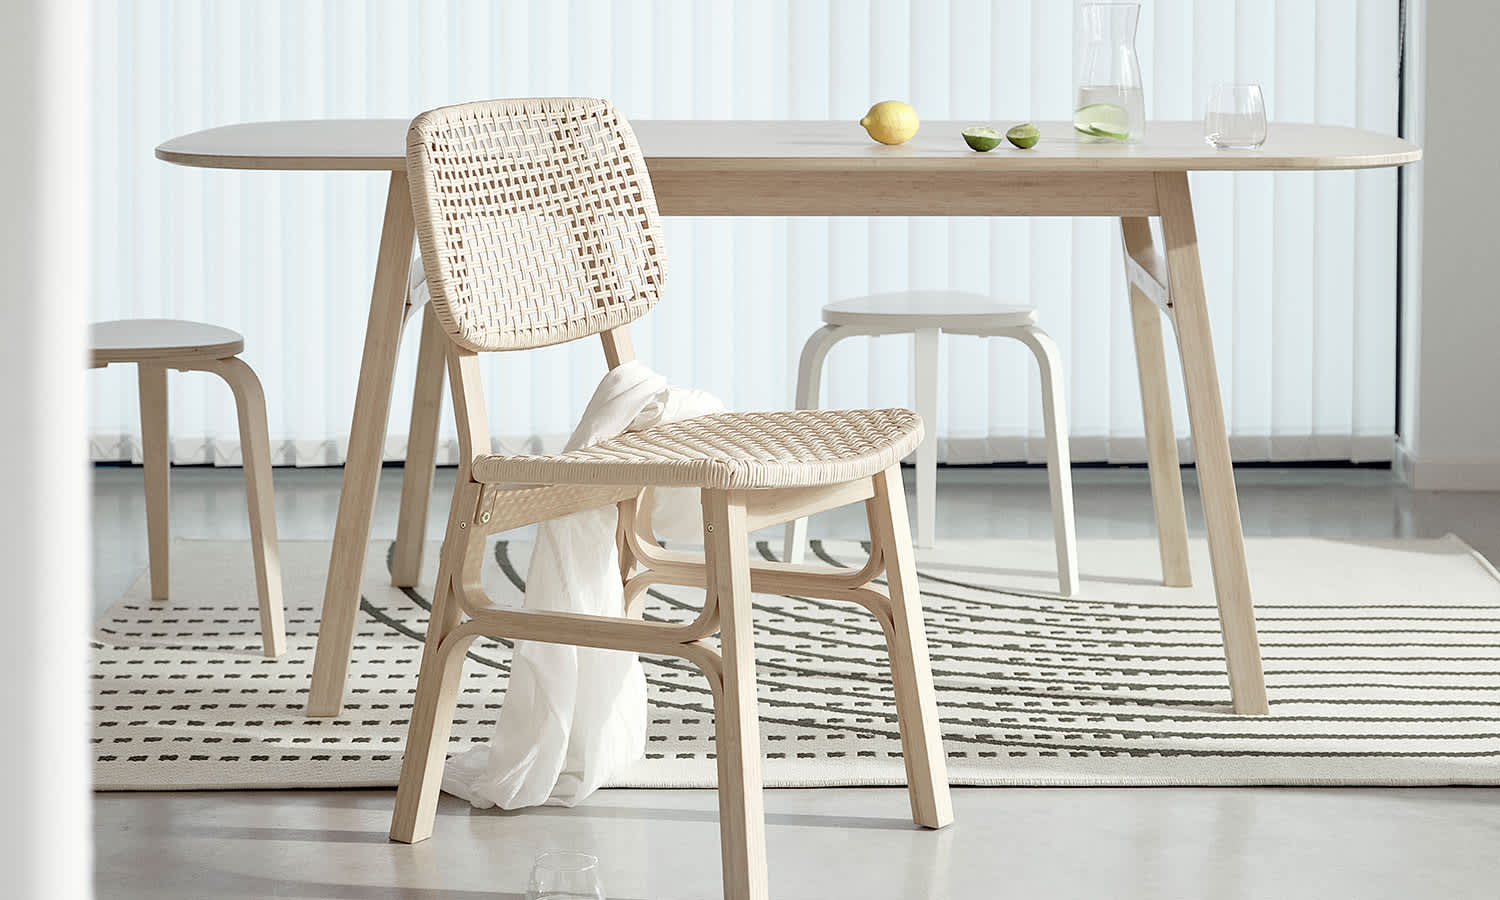 ikea-wooden-chairs